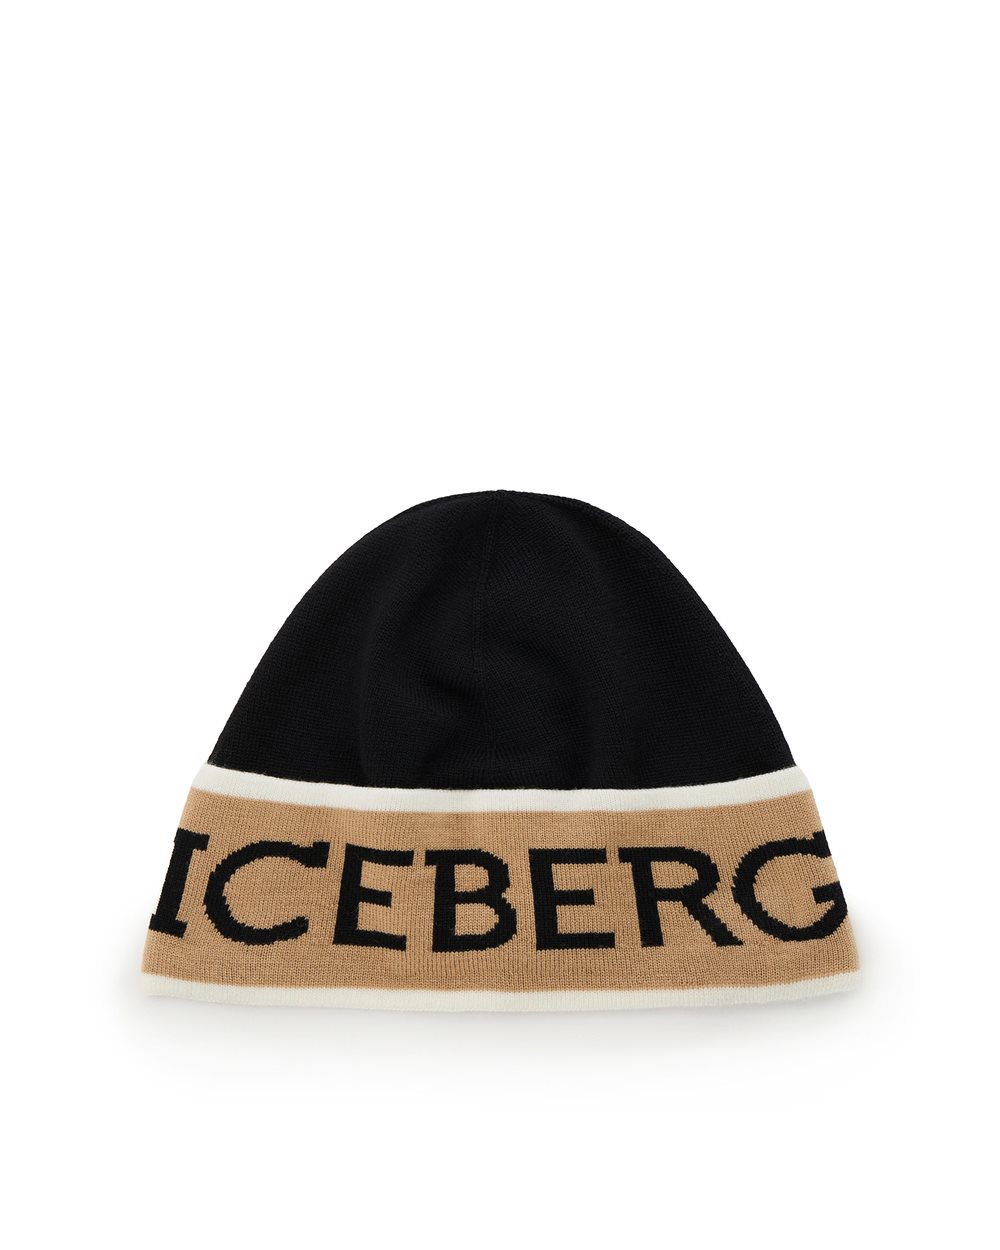 Black wool beanie with logo -  ( PRIMO STEP DE ) PROMO SALDI UP TO 40% | Iceberg - Official Website